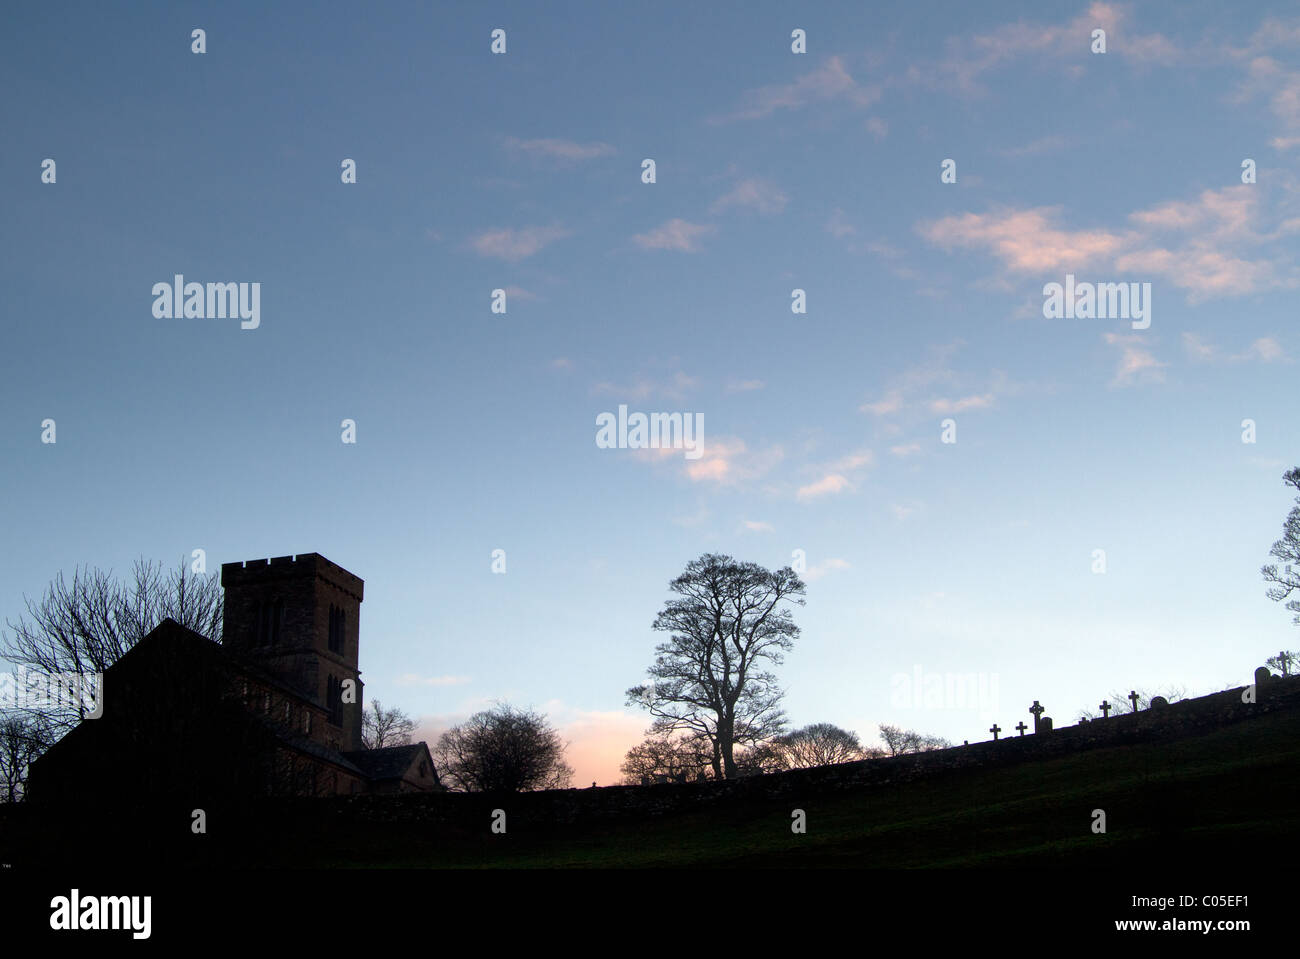 A church with head stones silhouetted against a blue sky Stock Photo